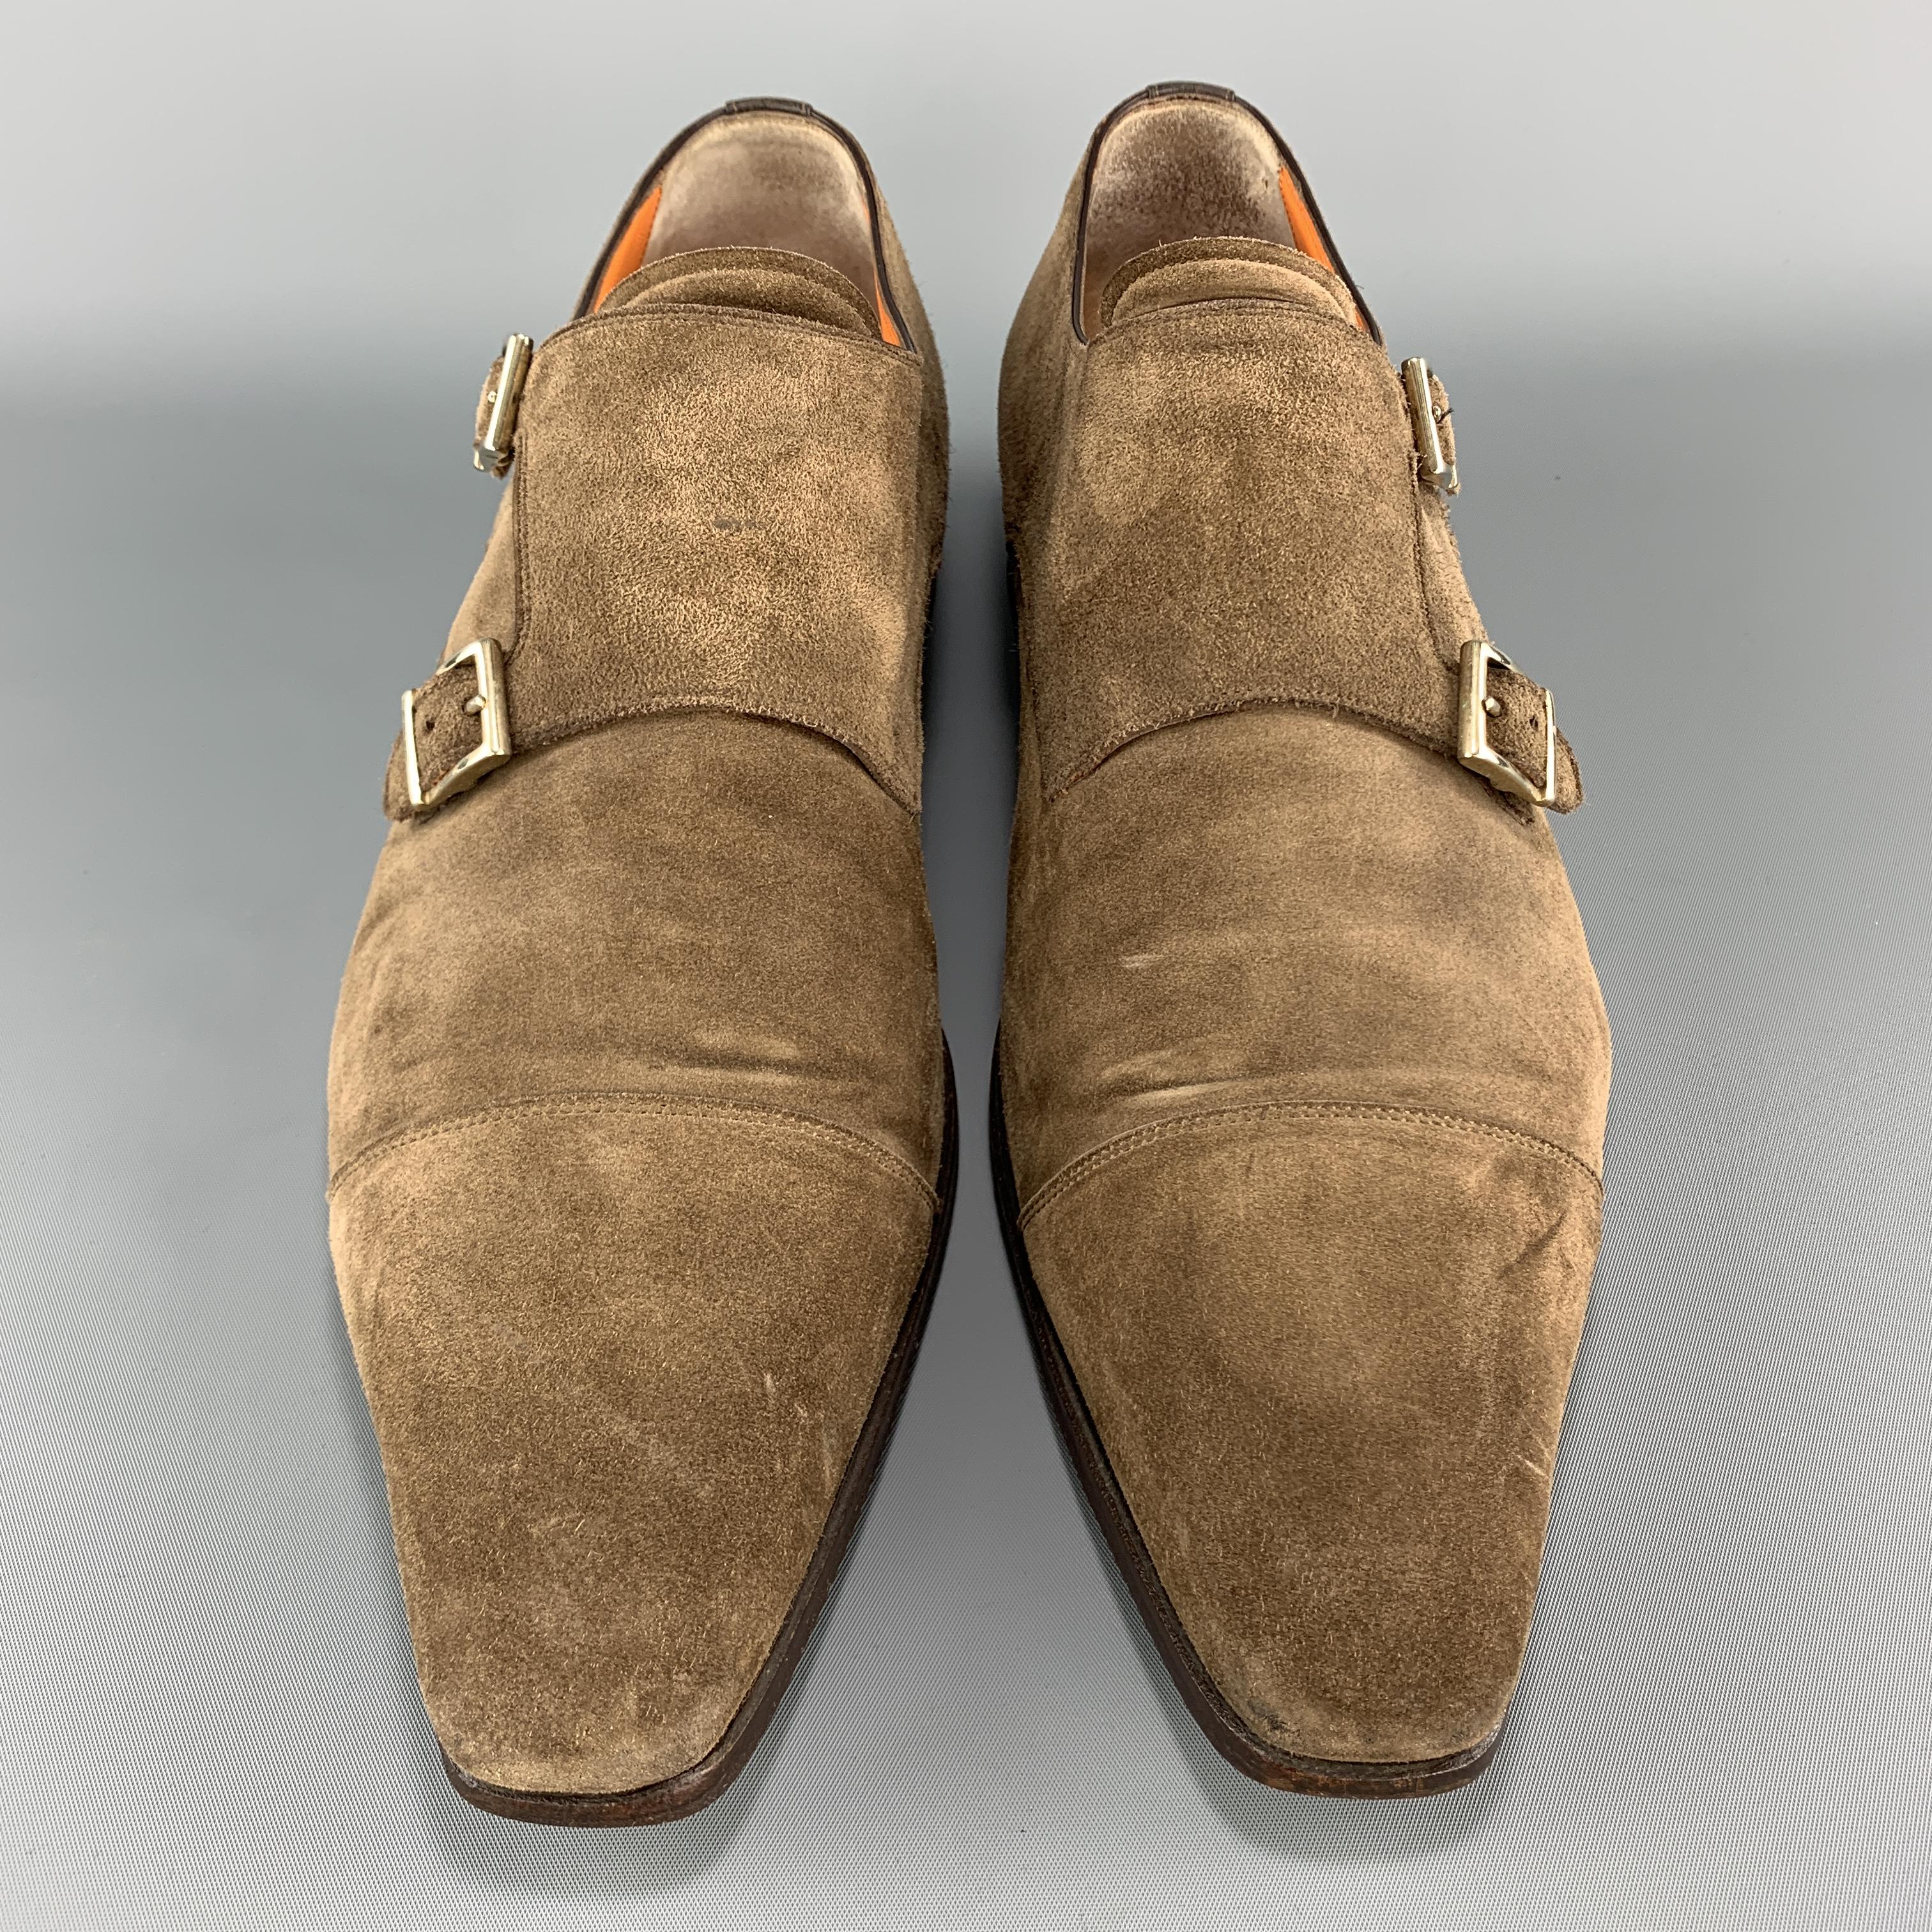 SANTONI dress loafers come in taupe suede with a pointed cap toe and double monk strap closures. Made in Italy. 

Good Pre-Owned Condition.
Marked: UK 10.5

Outsole: 13 x 4 in.